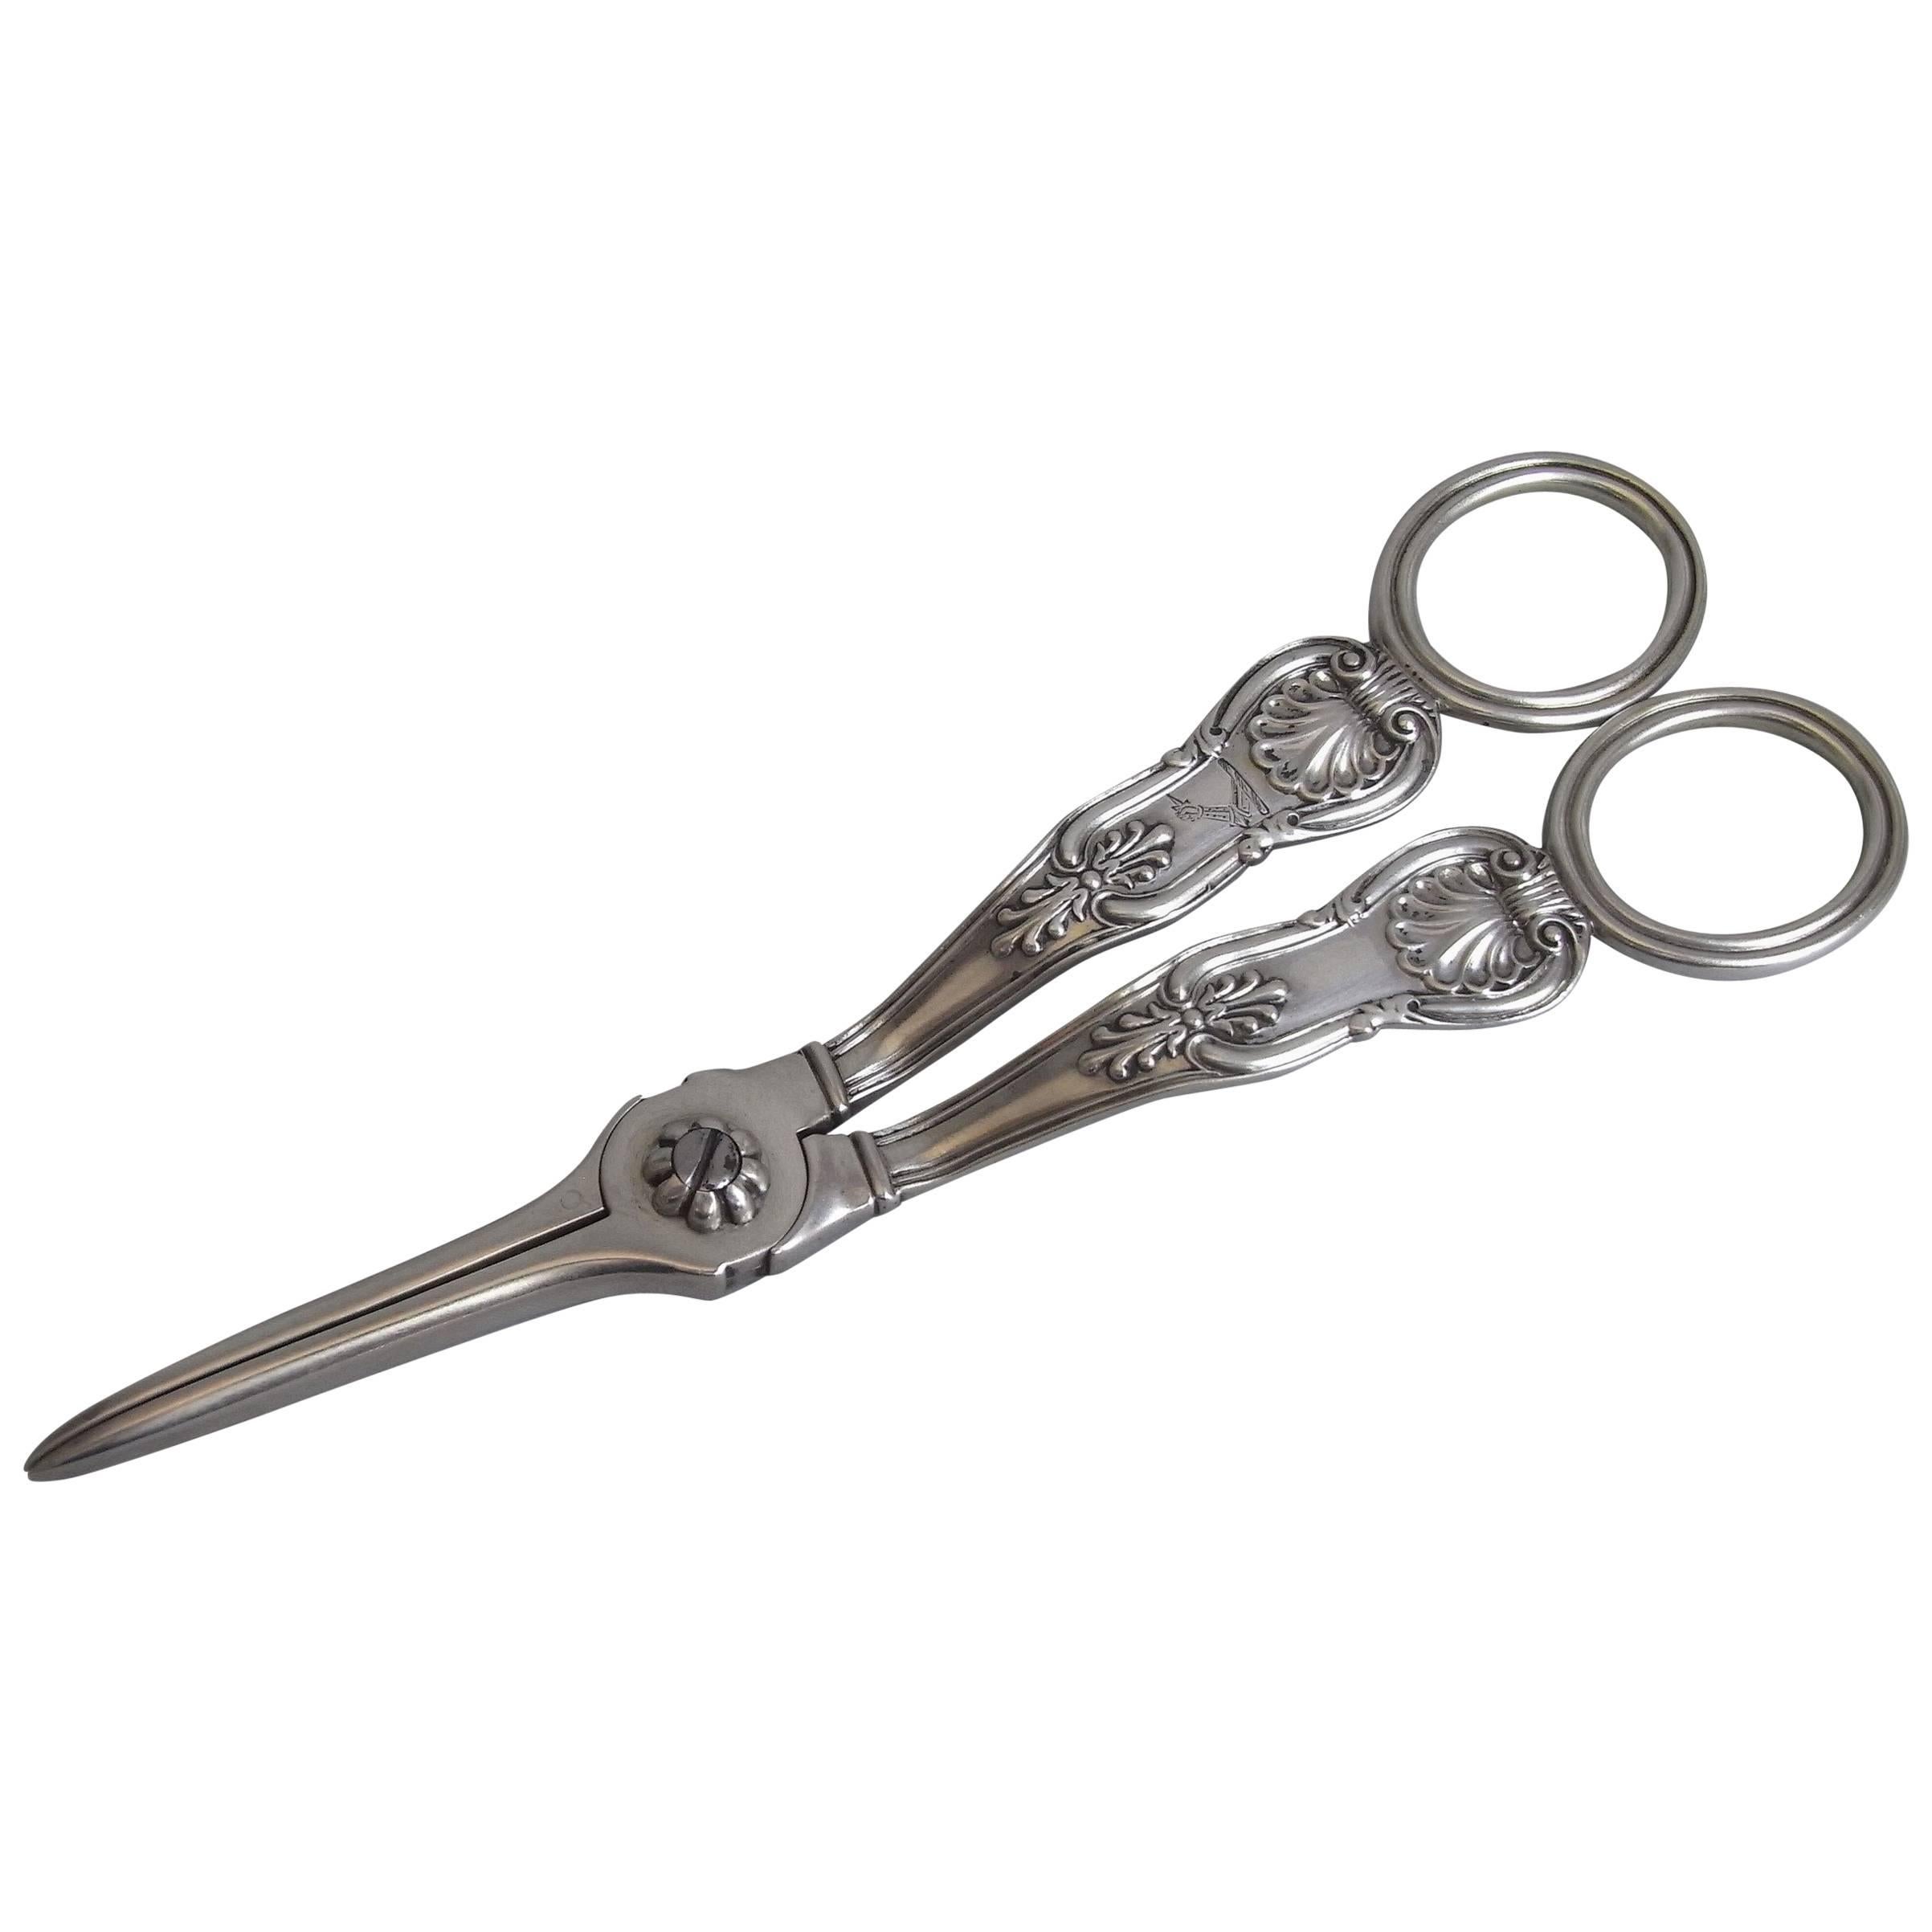 PAUL STORR. Pair of George III Grape Shears Made by Paul Storr in London in 1824 For Sale